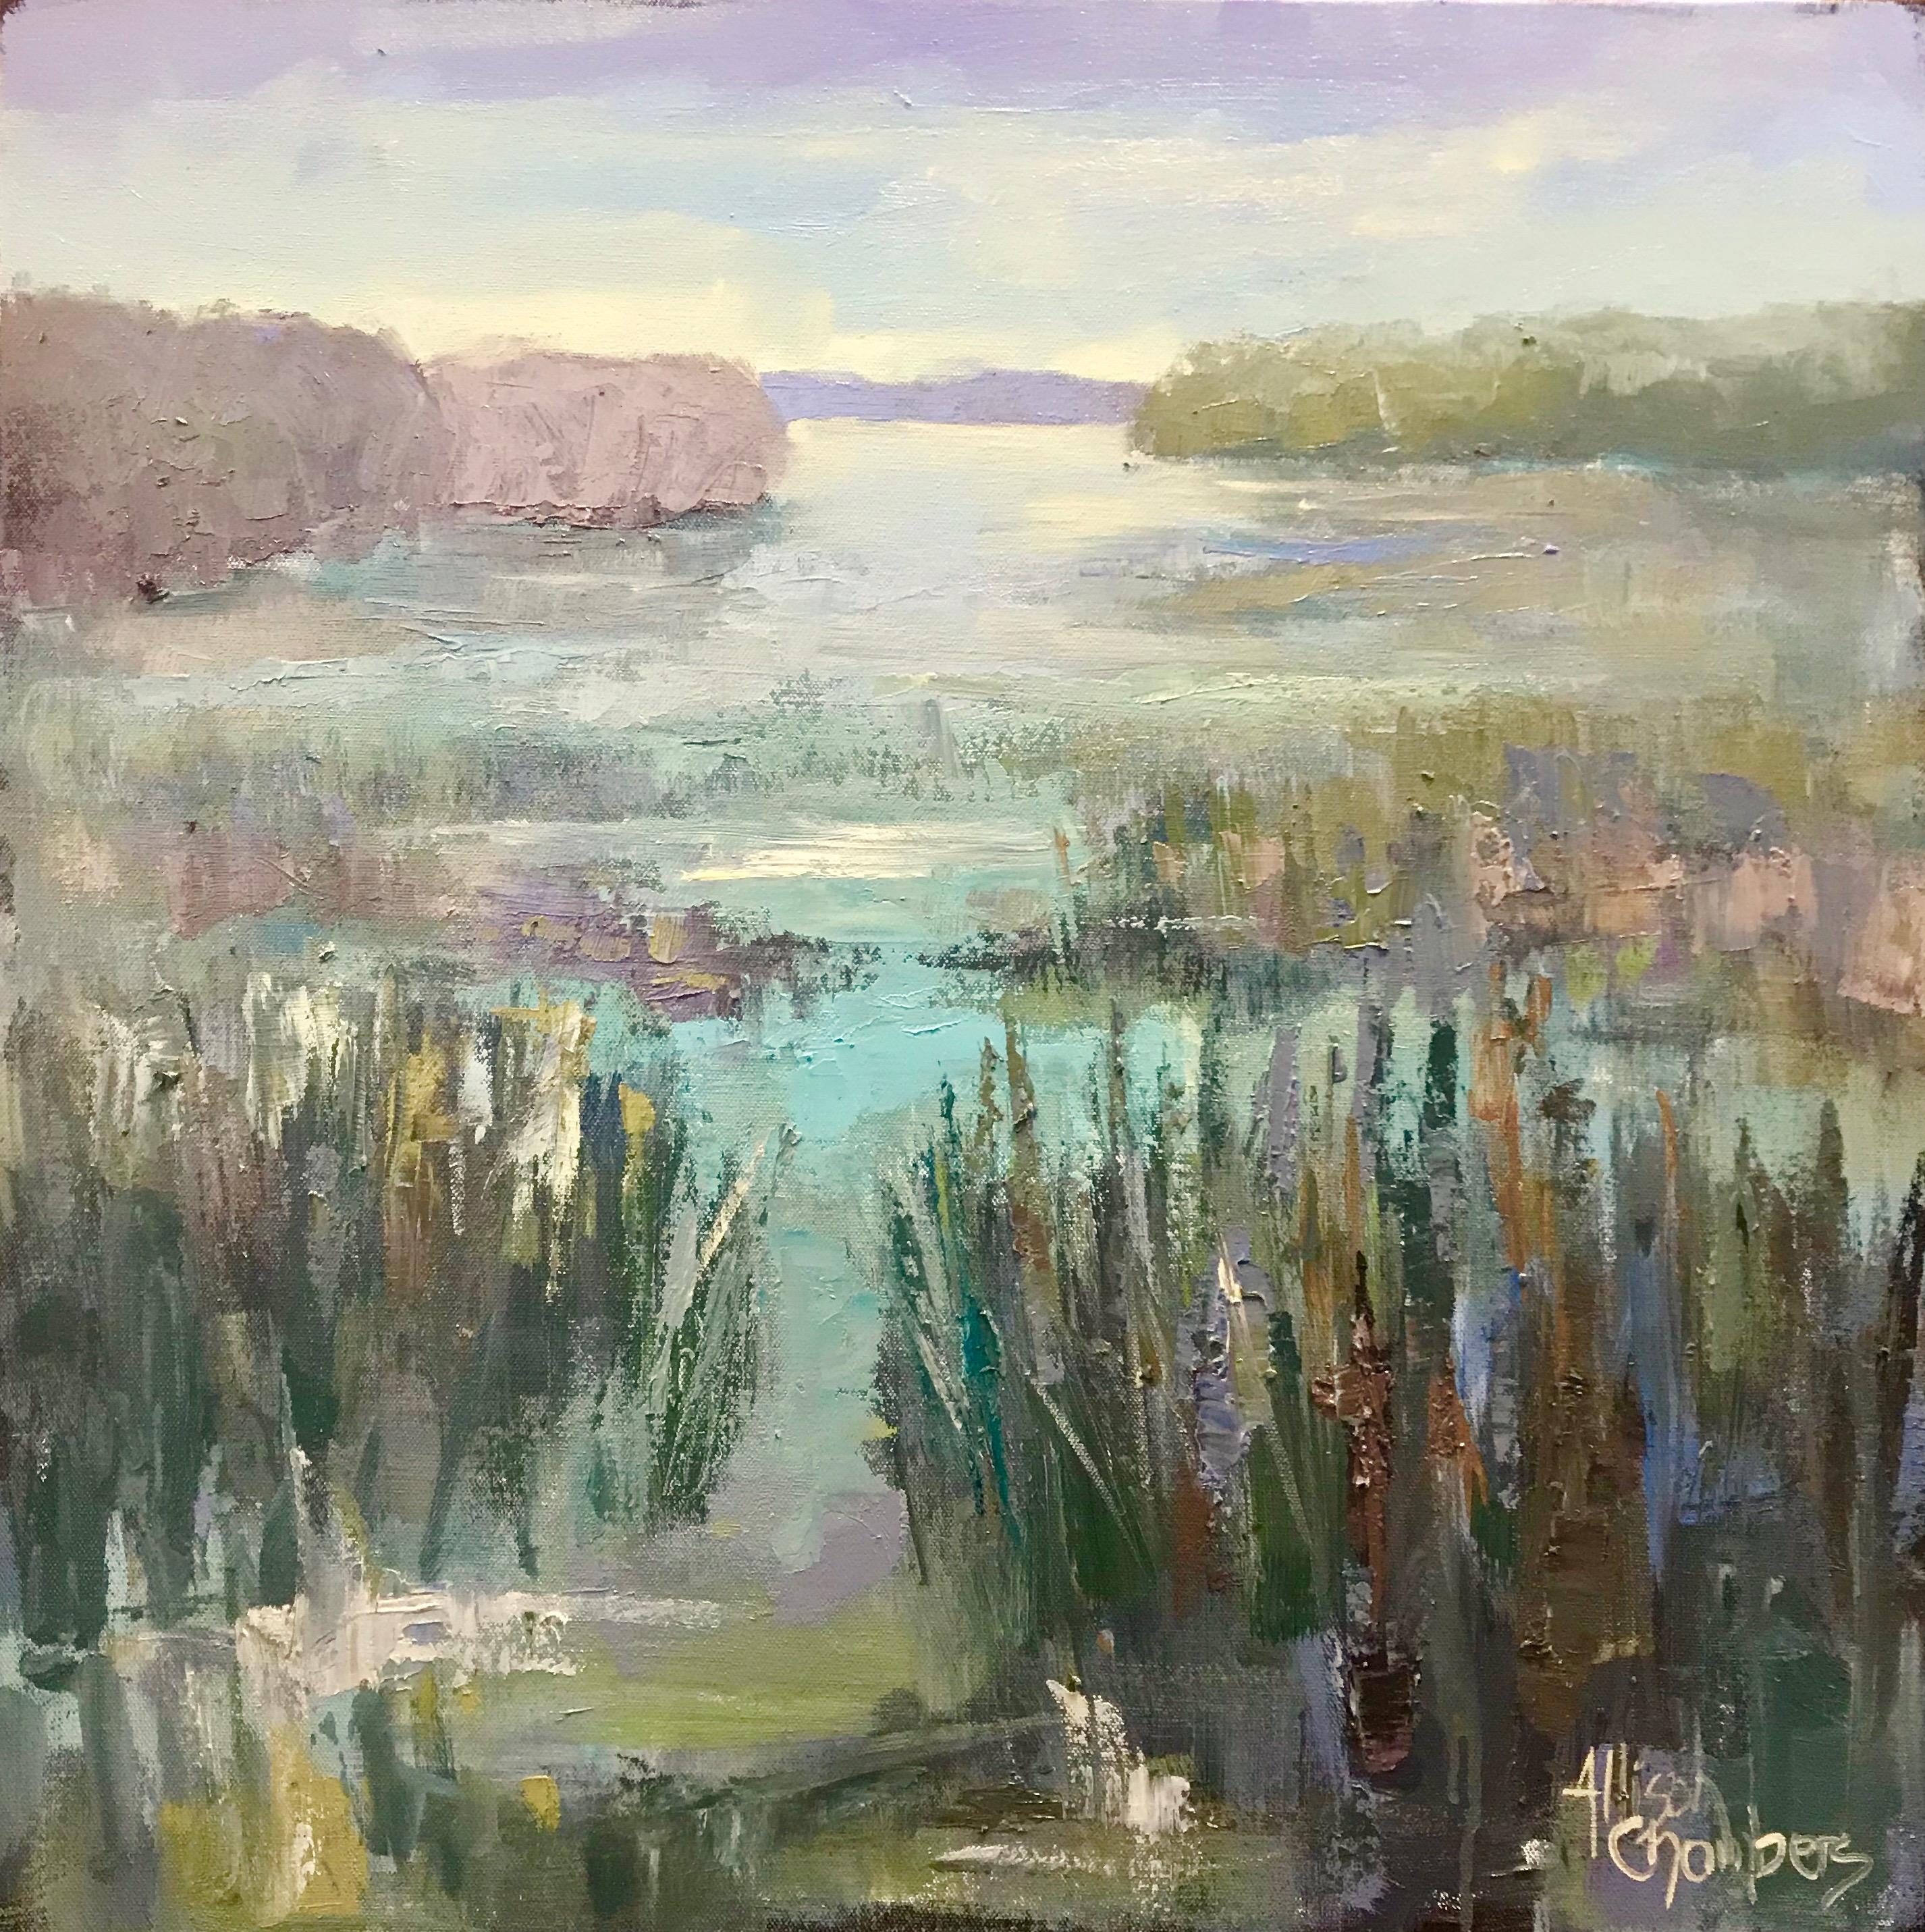 'Serene' is a medium size Impressionist landscape oil on canvas painting created by American artist Allison Chambers in 2019. Featuring an exquisite palette made of teal, purple and green tones, the painting depicts a romantic and peaceful marshy